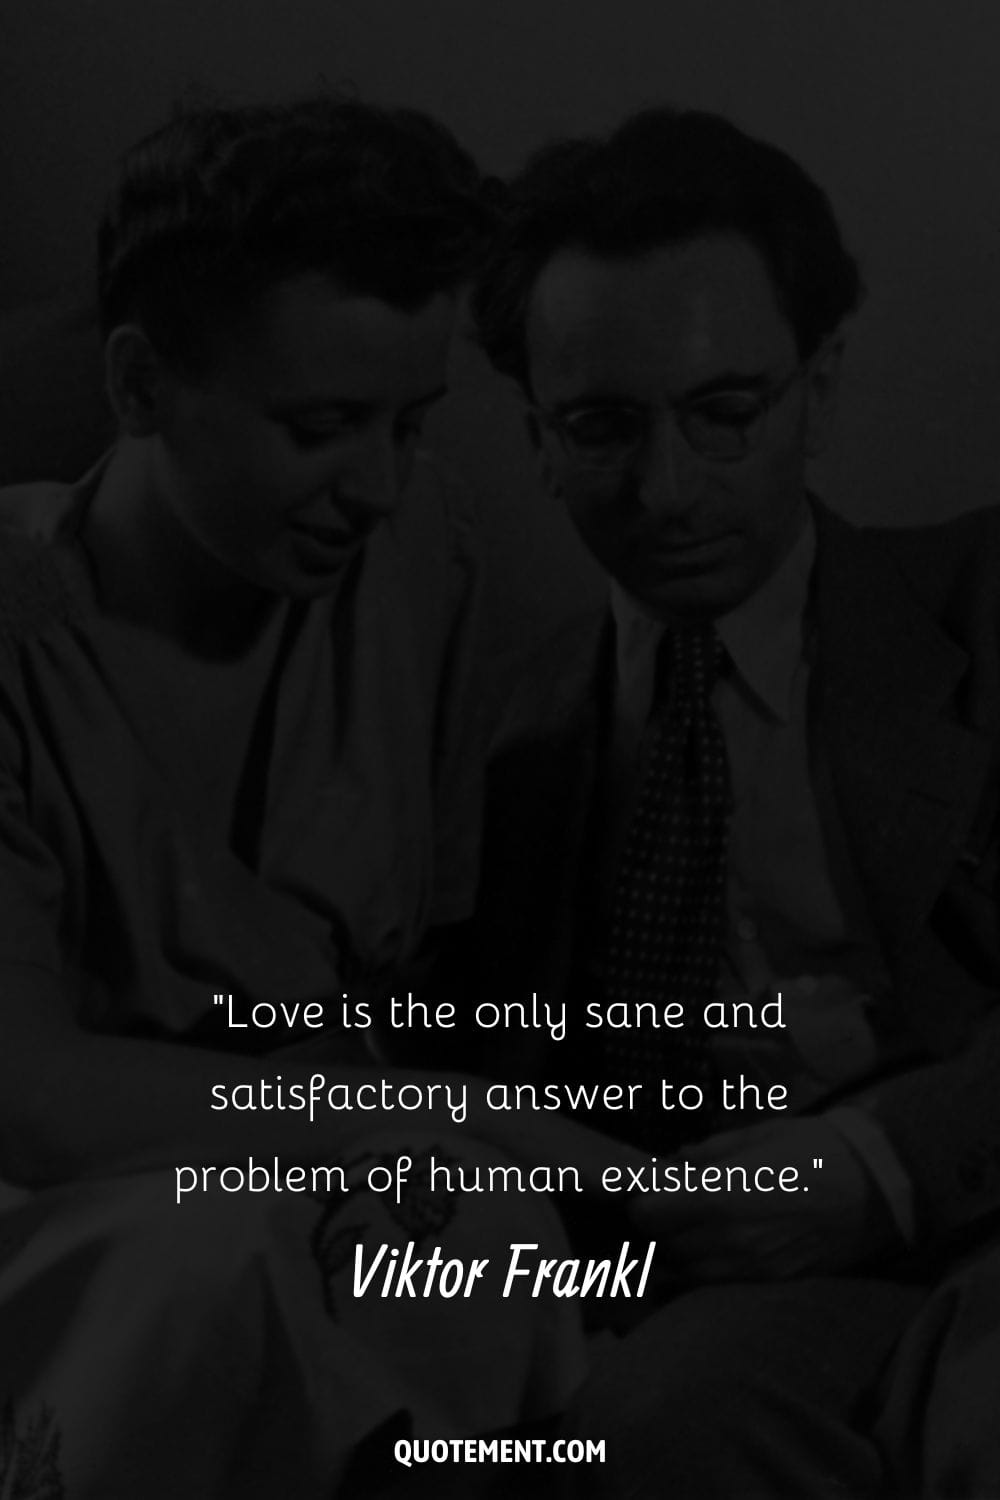 Image of Viktor Frankl with a woman representing his quote on love.